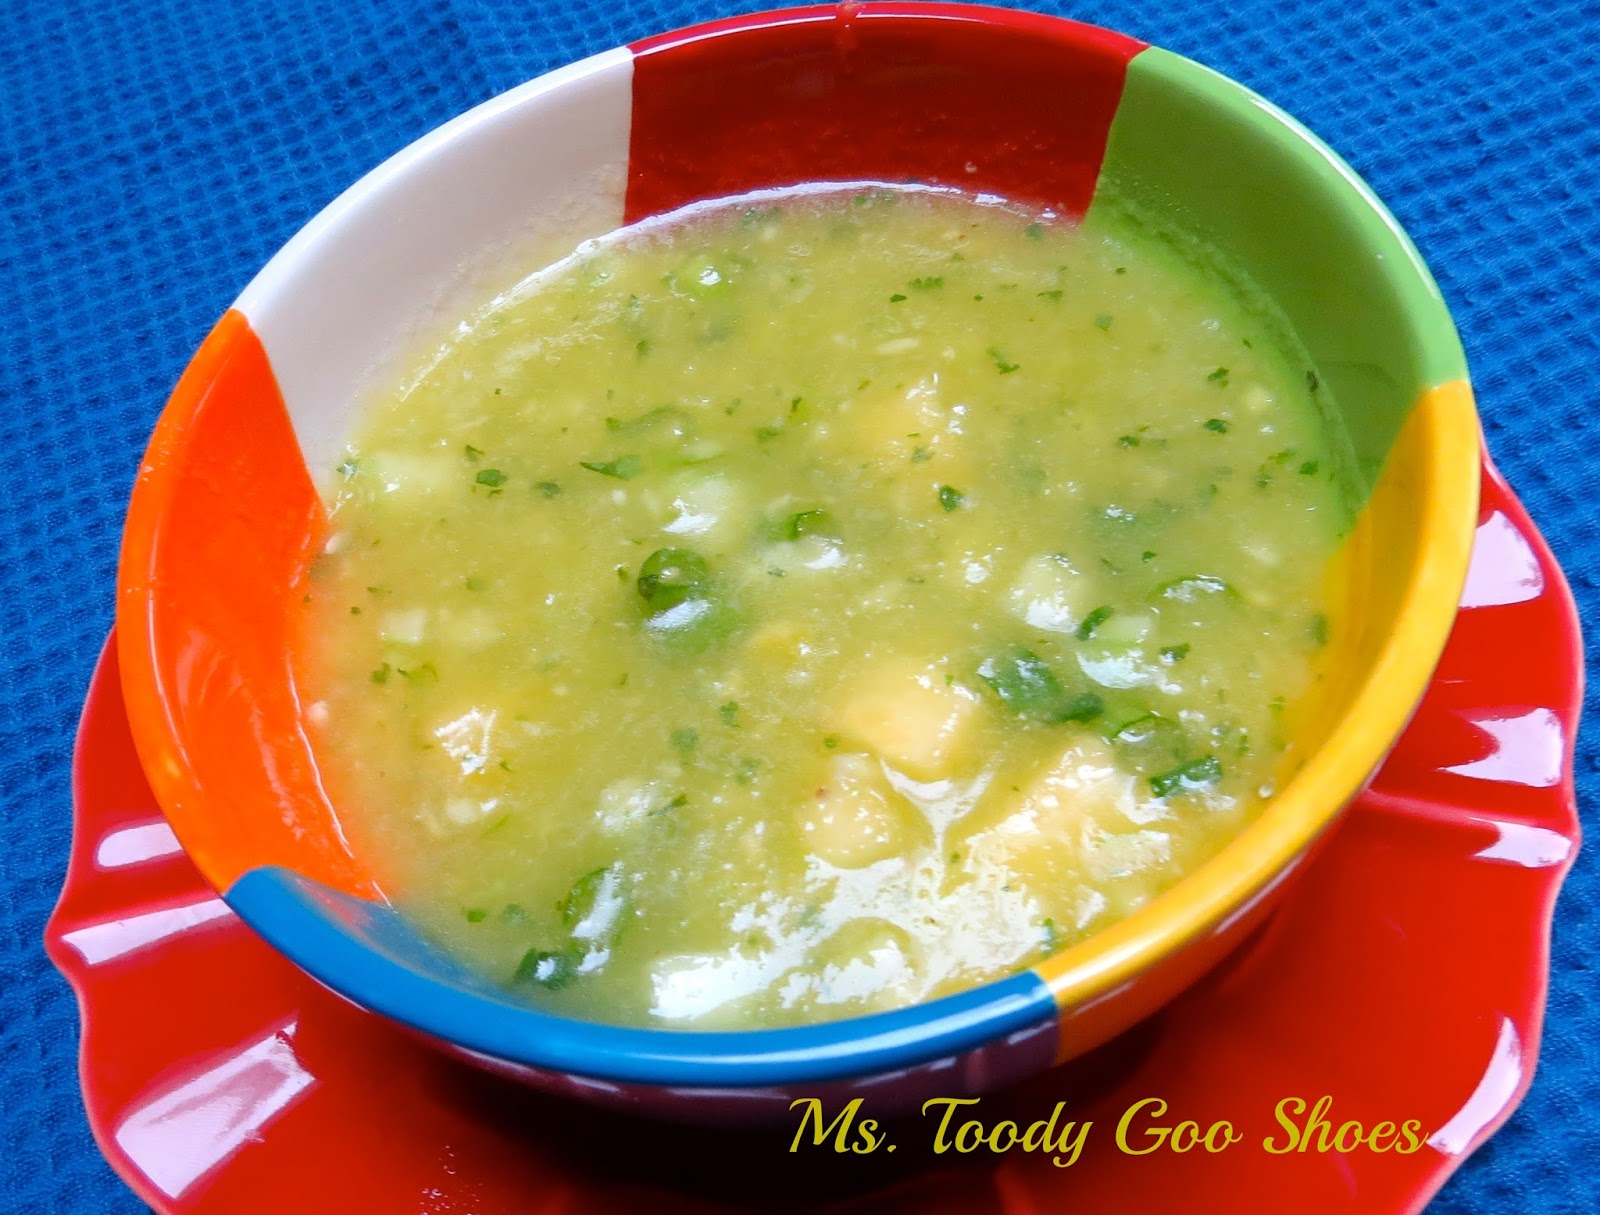 I'd Rather Do Anything But Cook" Pineapple Cucumber Gazpacho by Ms. Toody Goo Shoes